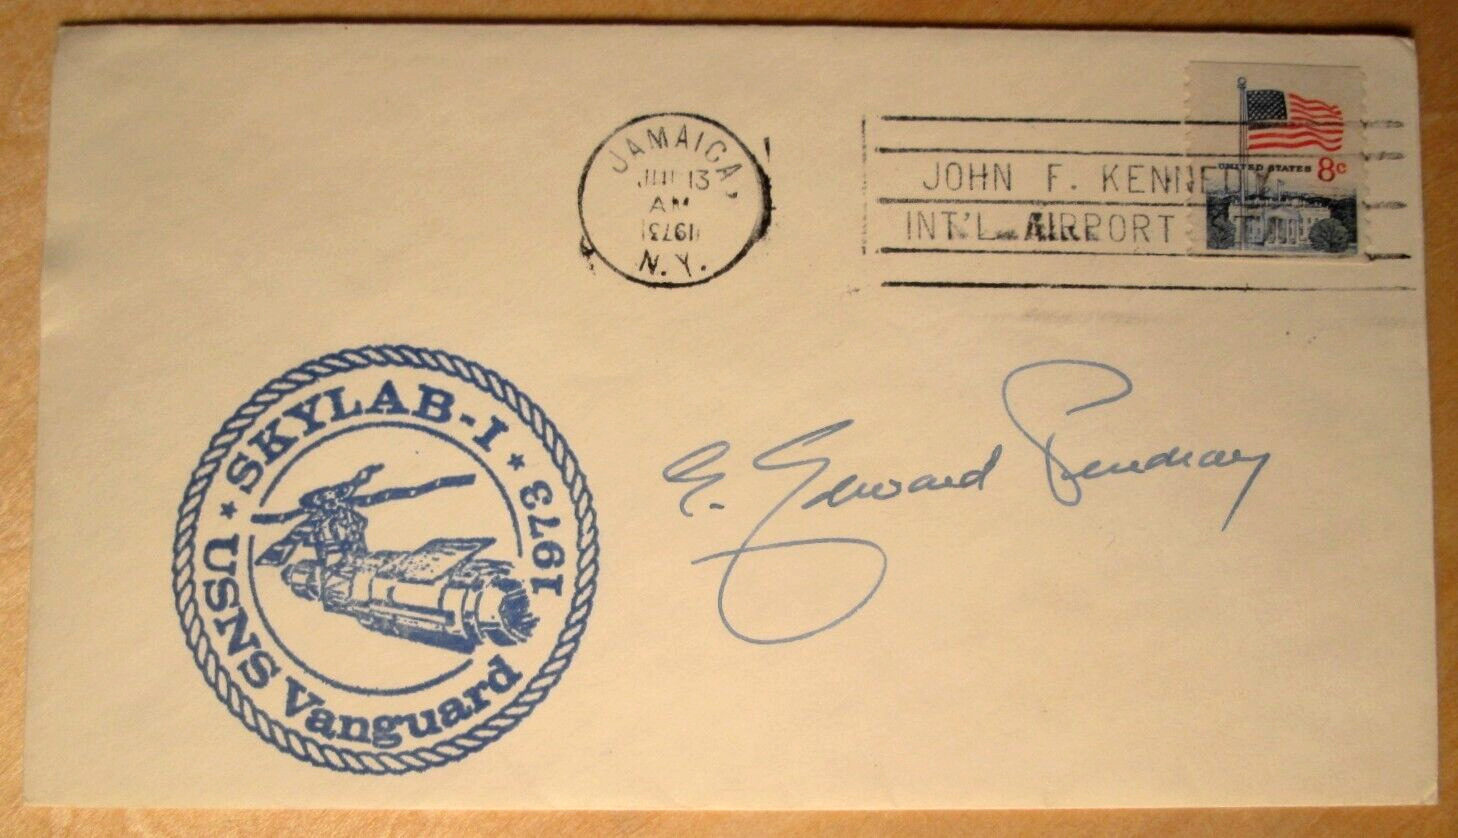 RARE Autograph G EDWARD PENDRAY American Rocket Society founder ARS space travel